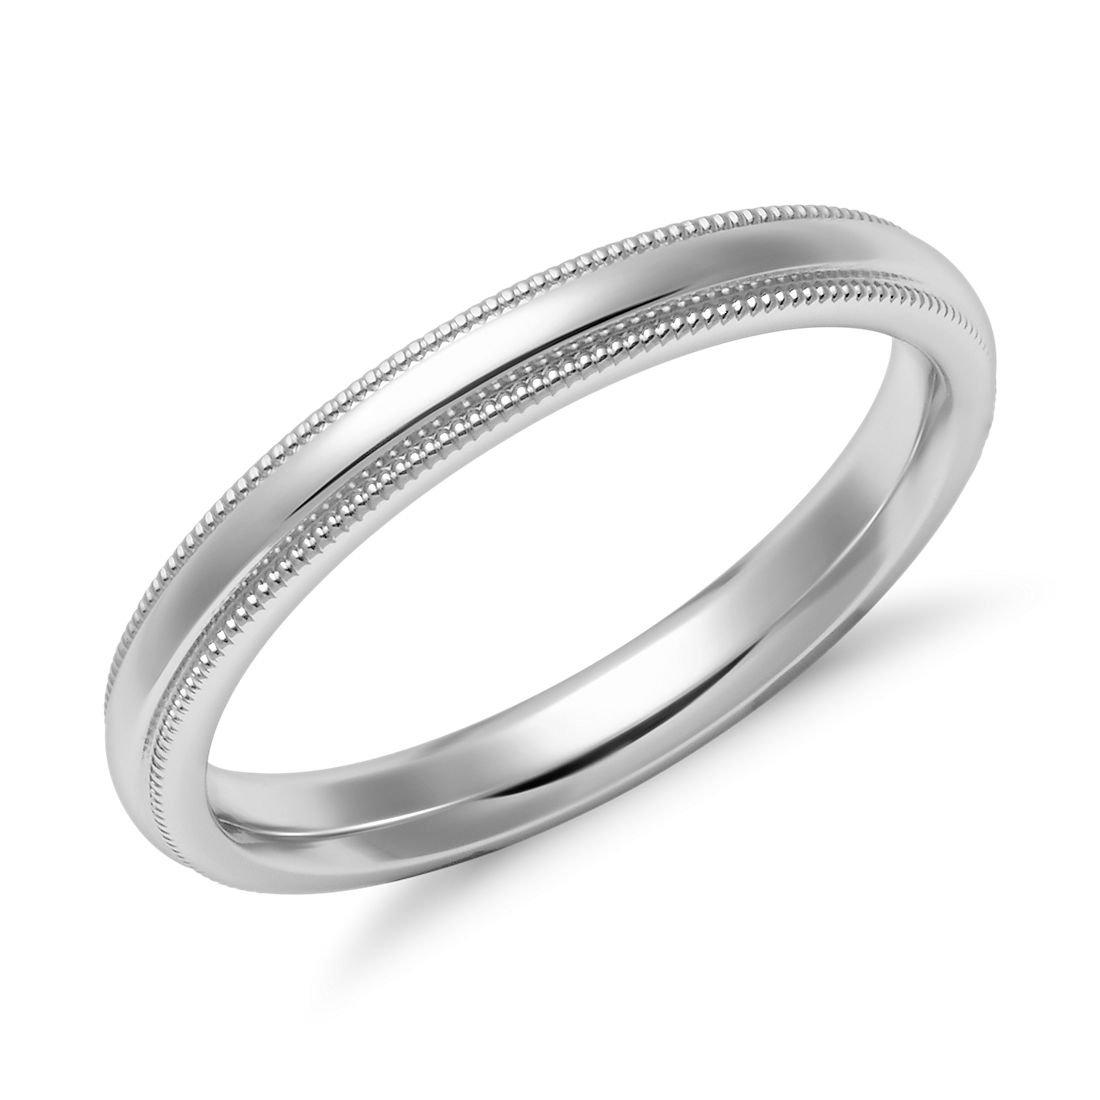 Mens 14K White Gold 2.5mm Square Comfort Fit Wedding Band Ring 